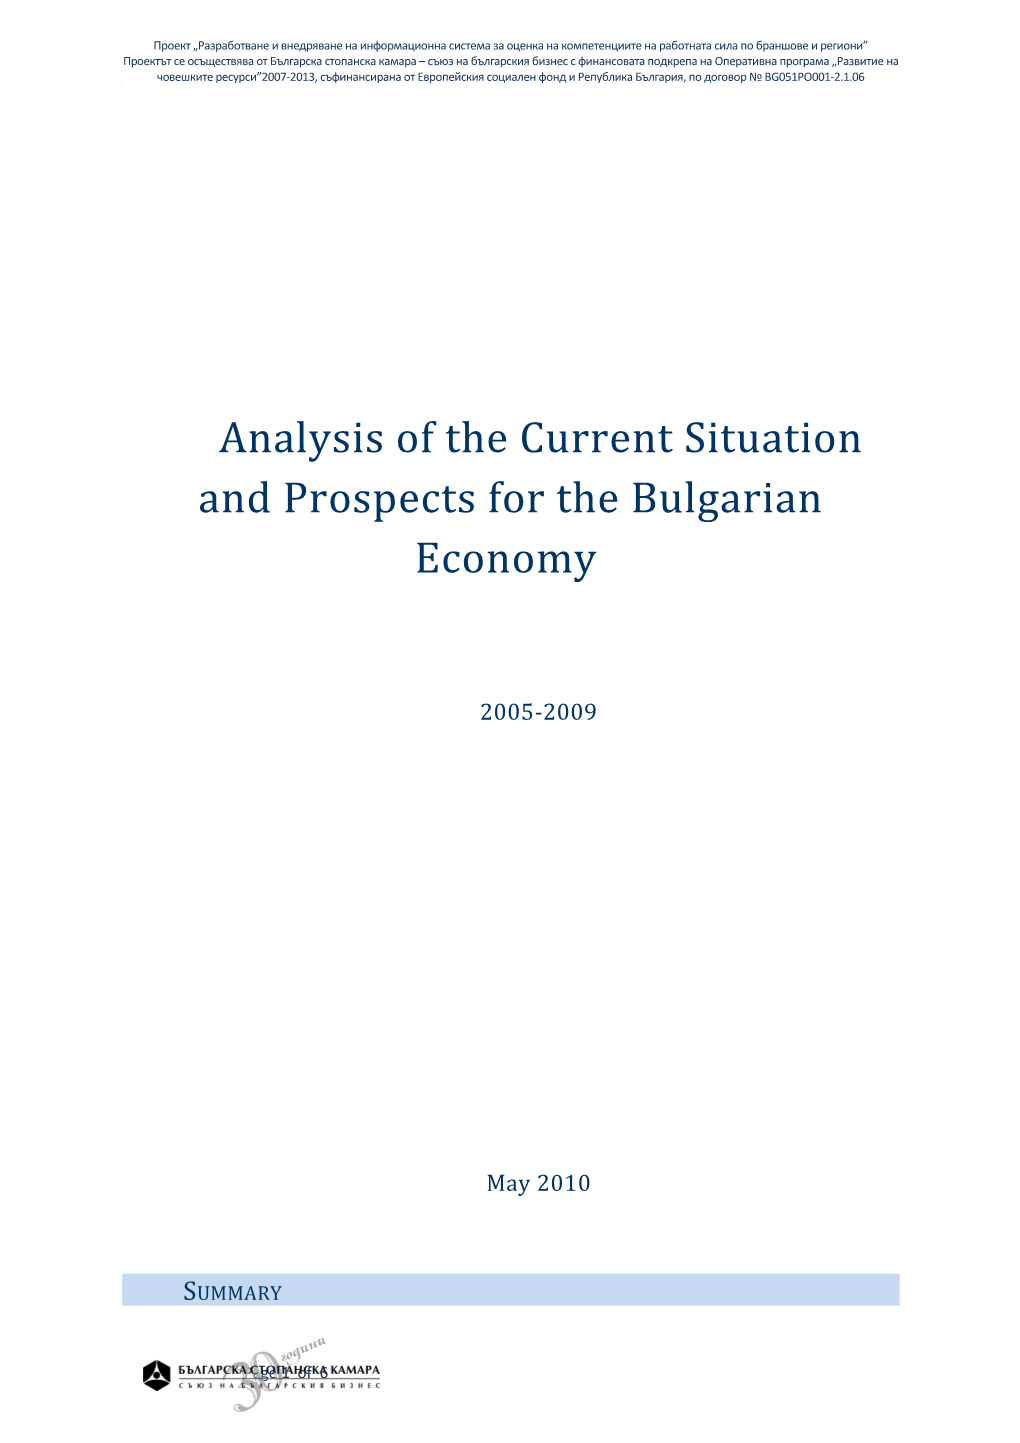 Analysis of the Current Situation and Prospects for the Bulgarian Economy